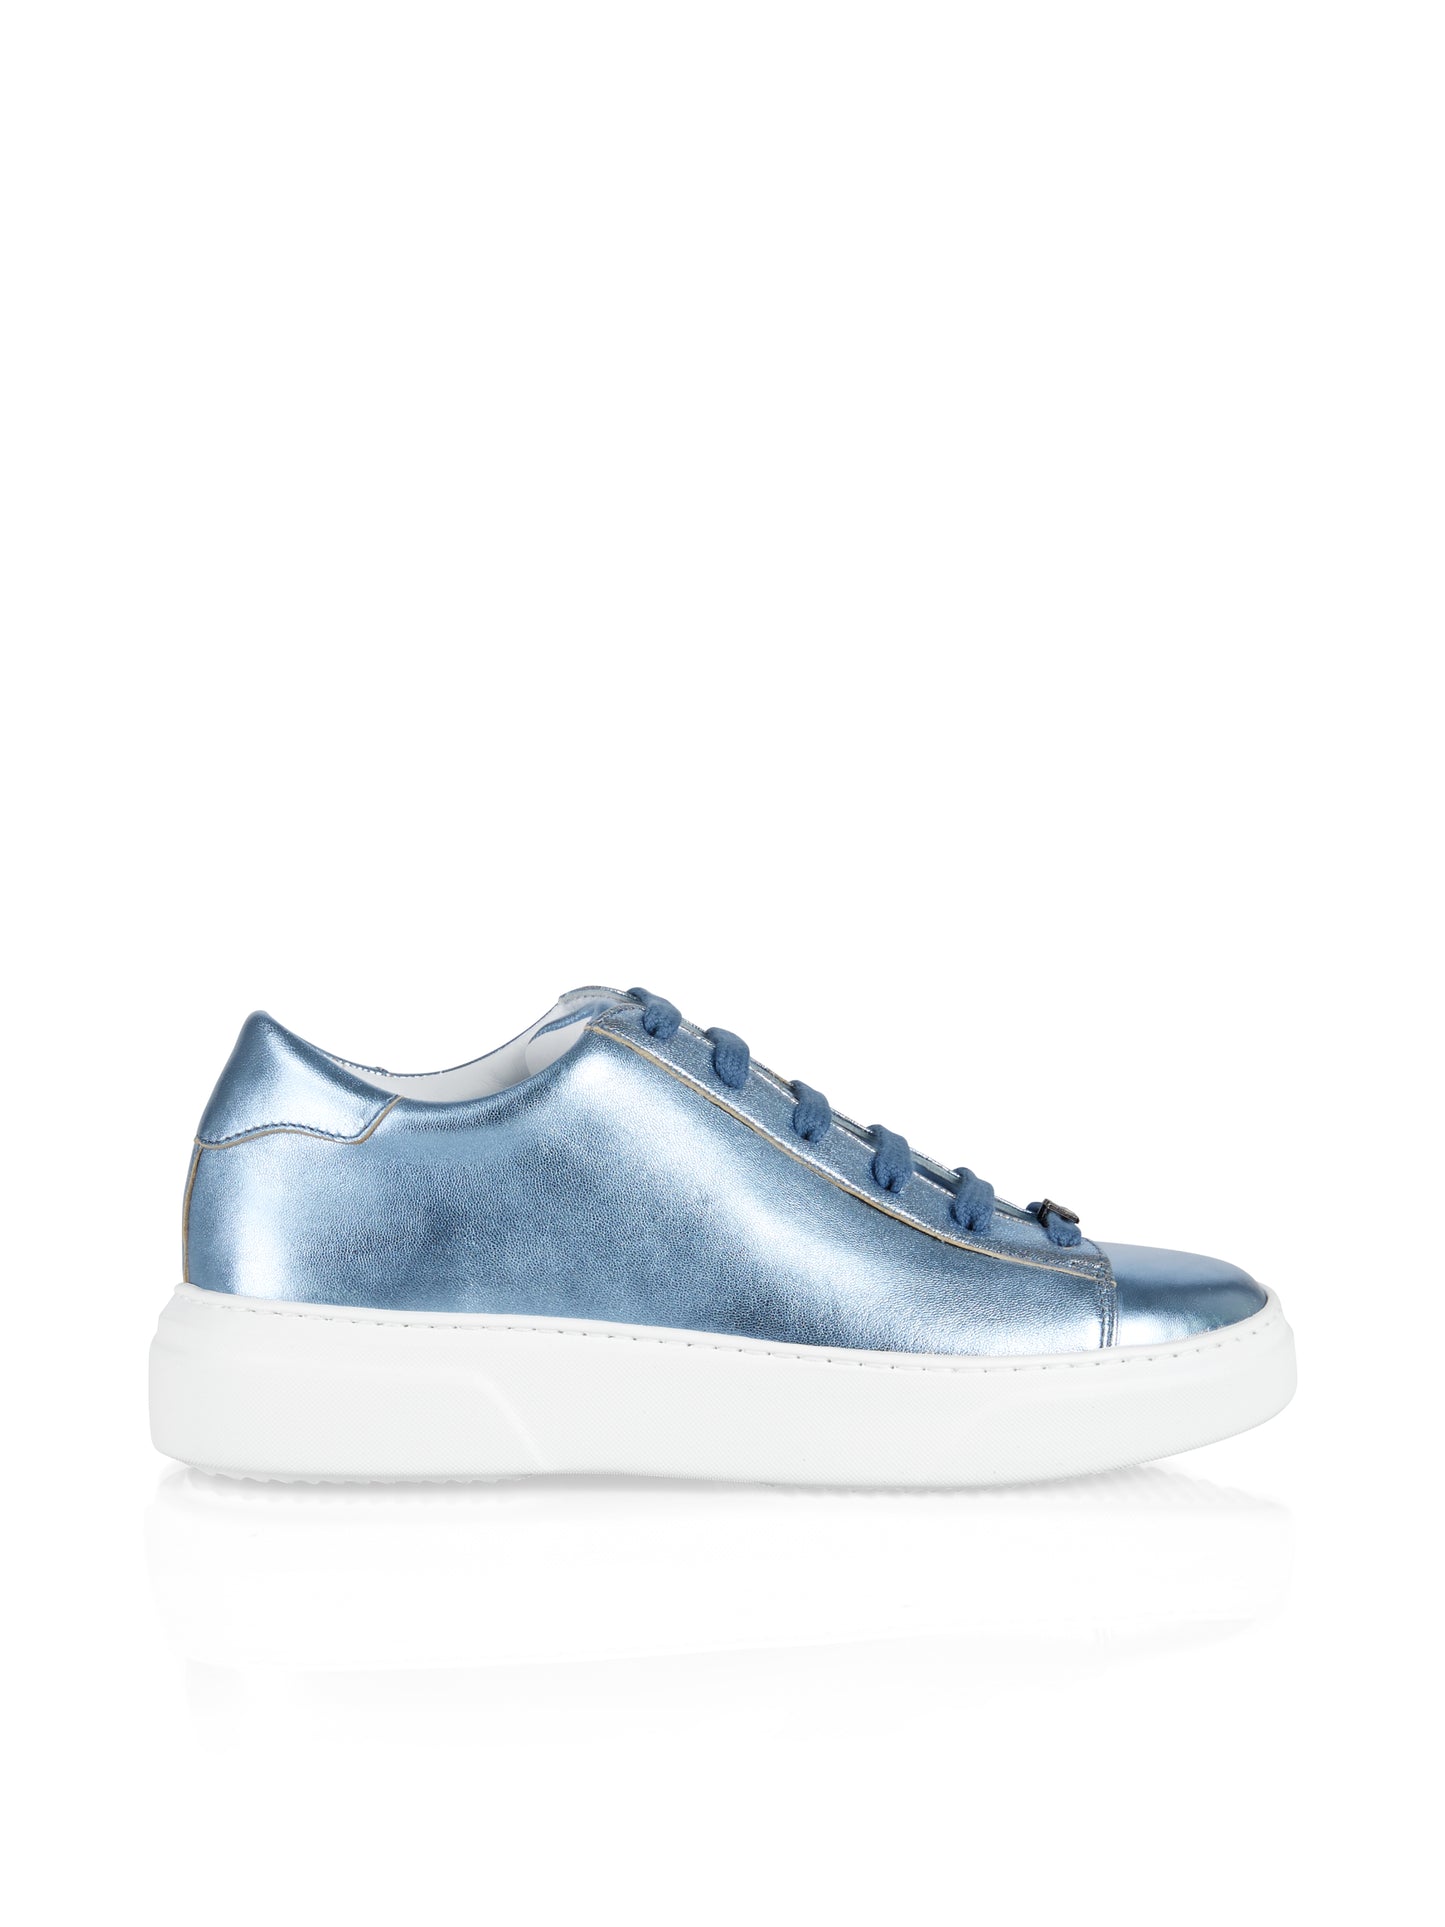 Marc Cain Bags & Shoes Metallic Trainers